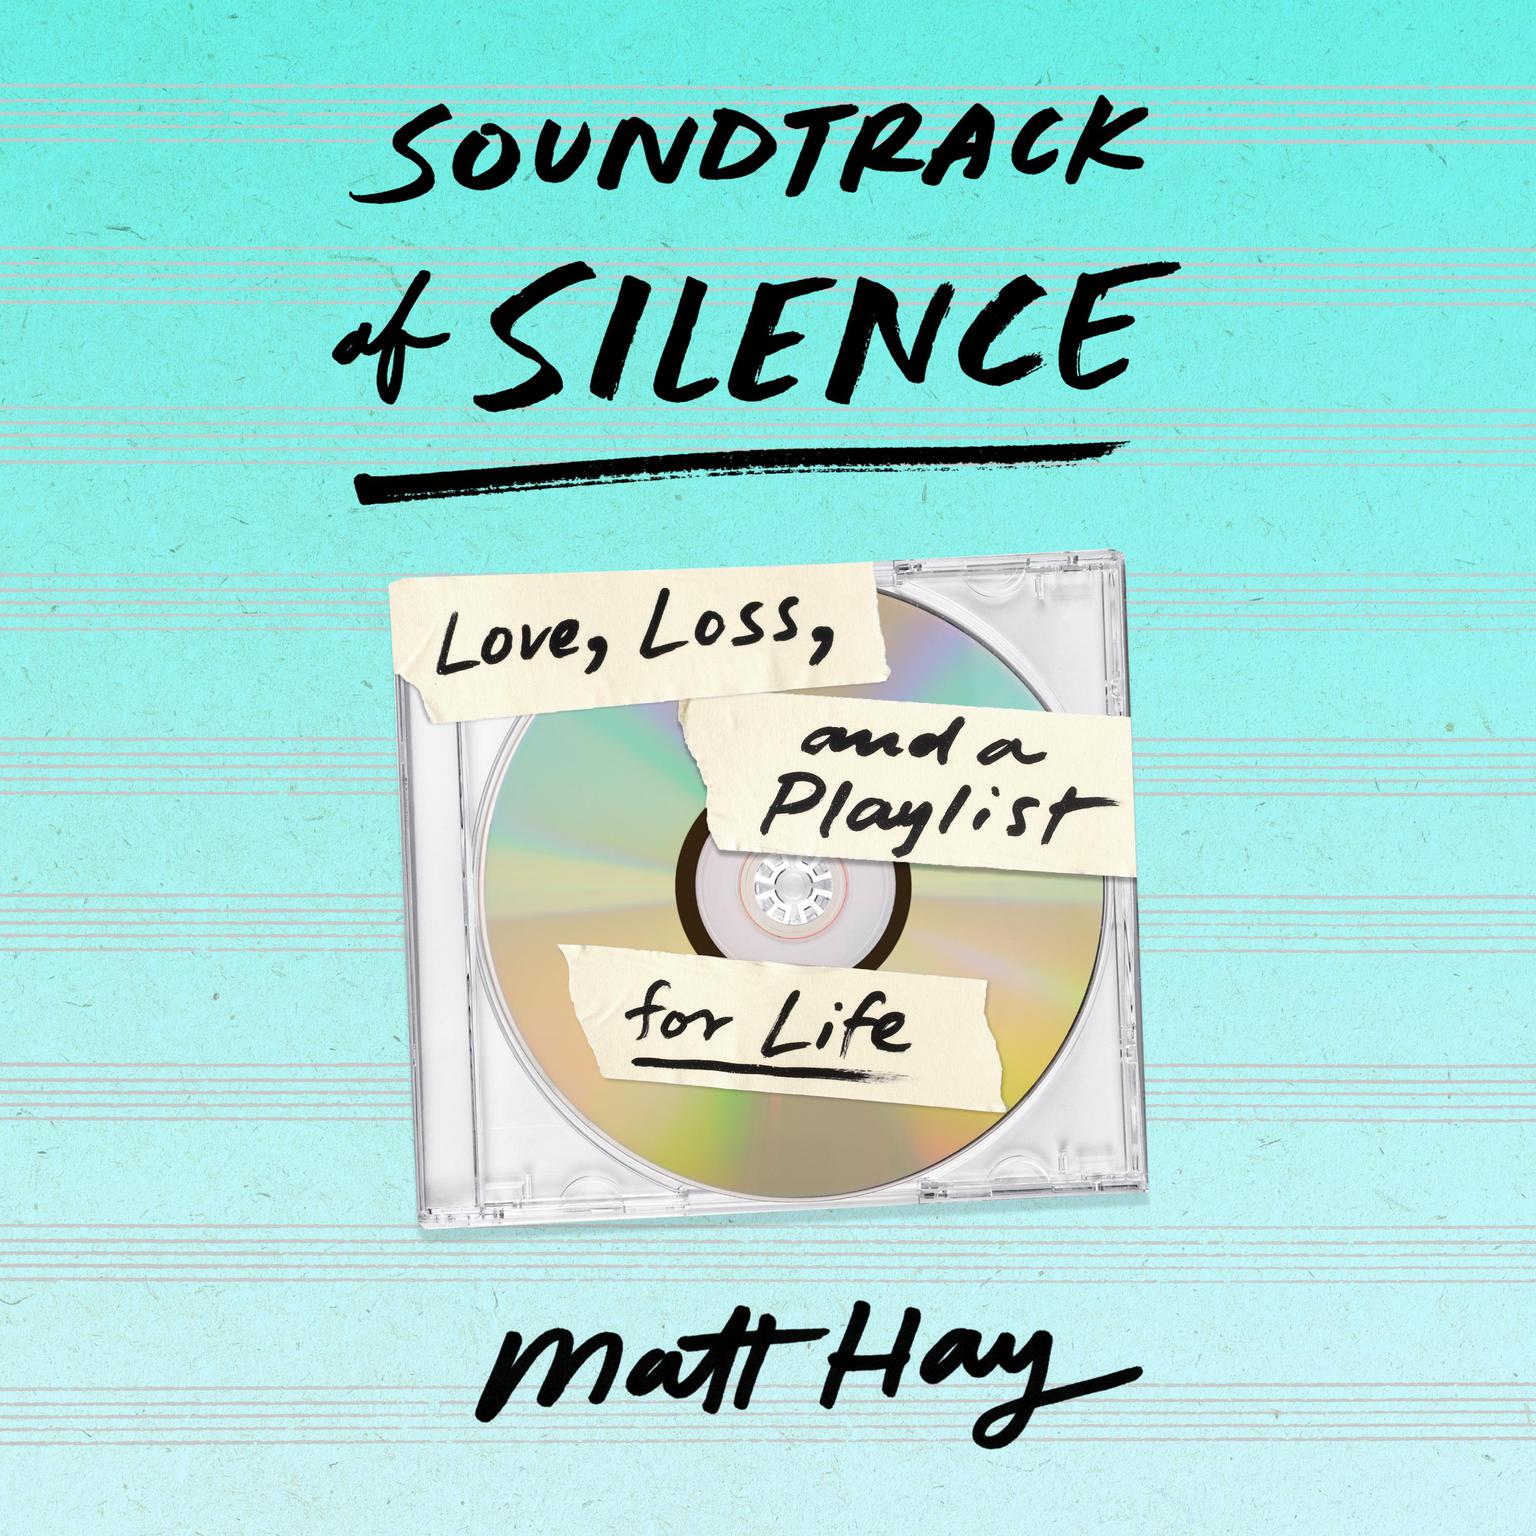 Soundtrack of Silence: Love, Loss, and a Playlist for Life Audiobook, by Matt Hay